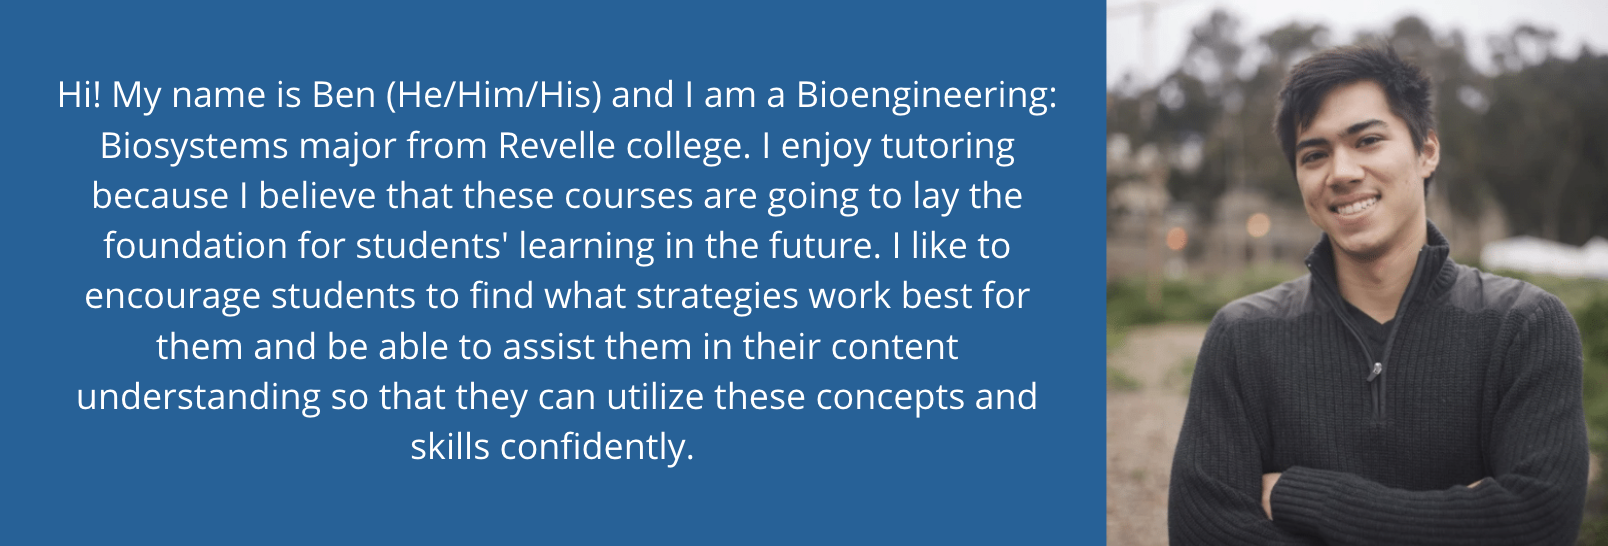 2 of 4, Hi! My name is Ben (He/Him/His) and I am a Bioengineering: Biosystems major from Revelle college. I enjoy tutoring because I believe that these courses are going to lay the foundation for students' learning in the future. I like to encourage students to find what strategies work best for them and be able to assist them in their content understanding so that they can utilize these concepts and skills confidently. 